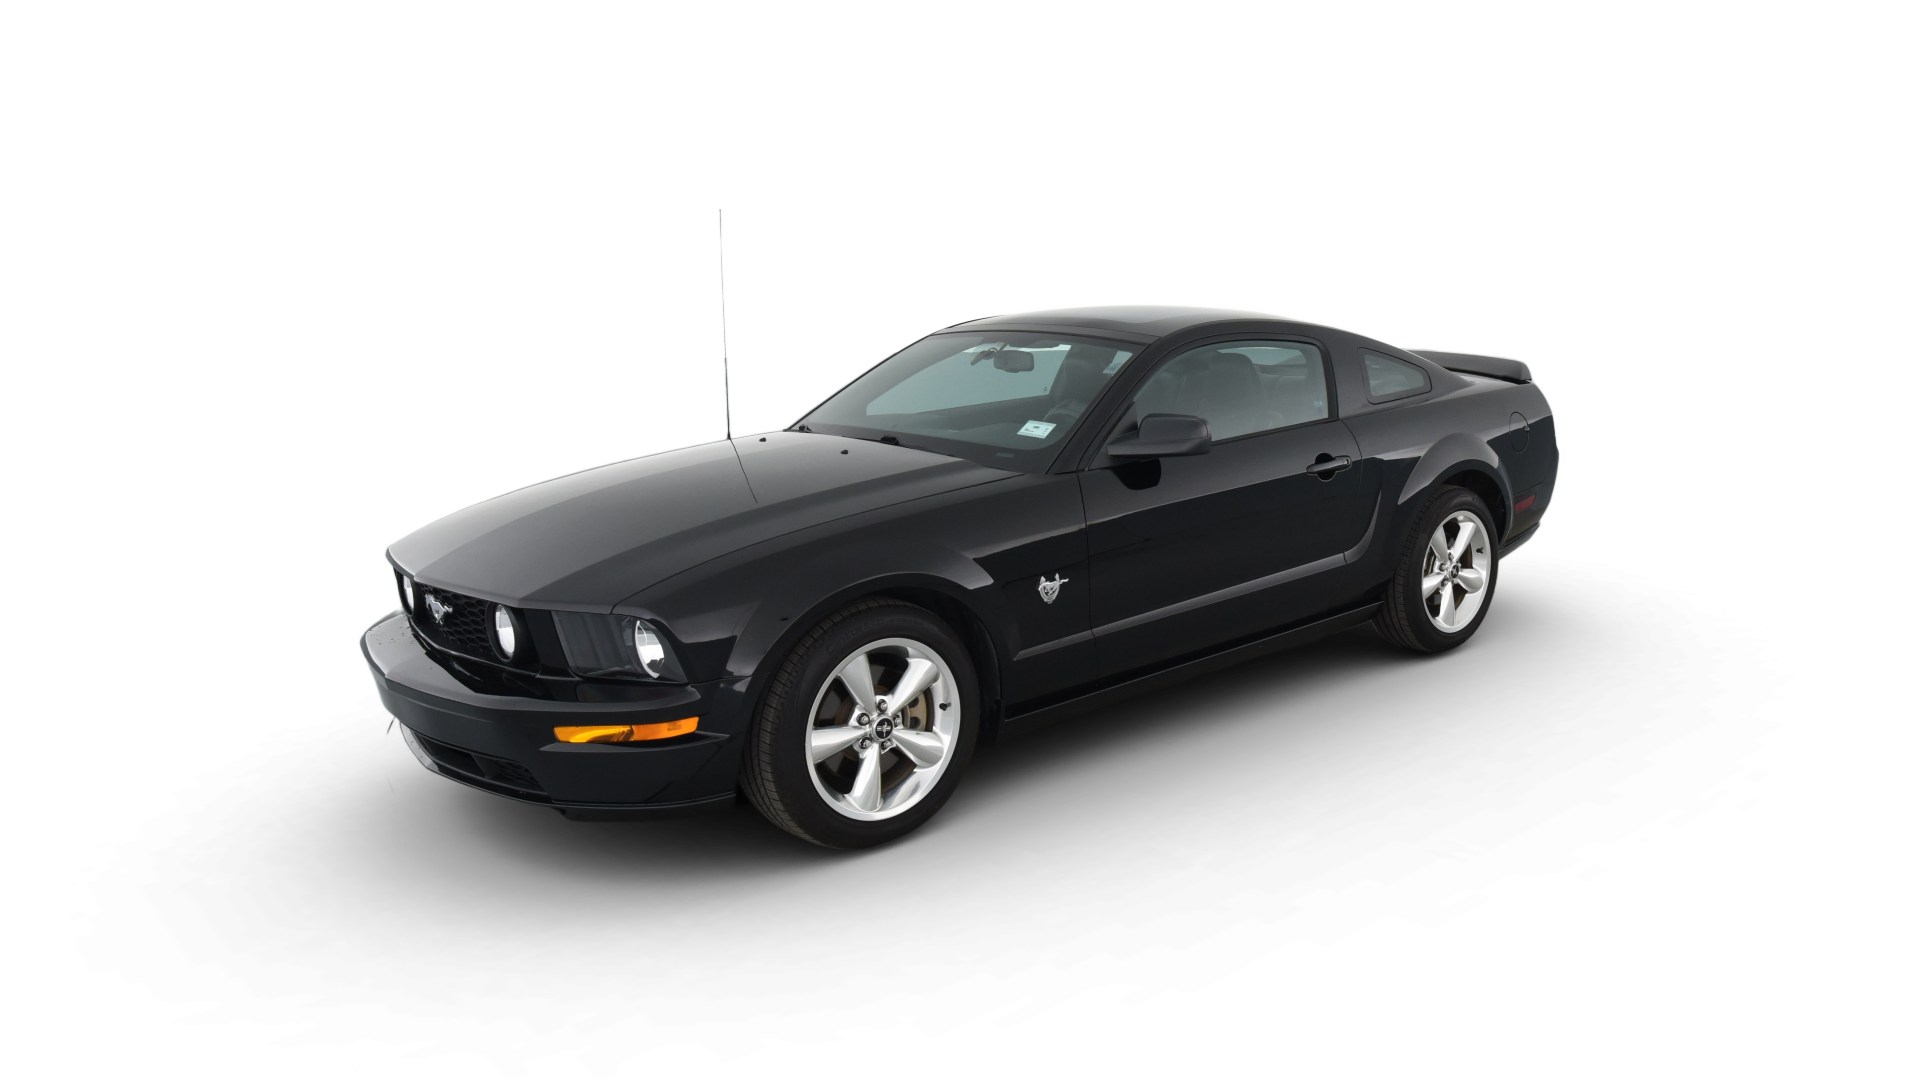 Used 2009 Ford Mustang For Sale Online | Carvana